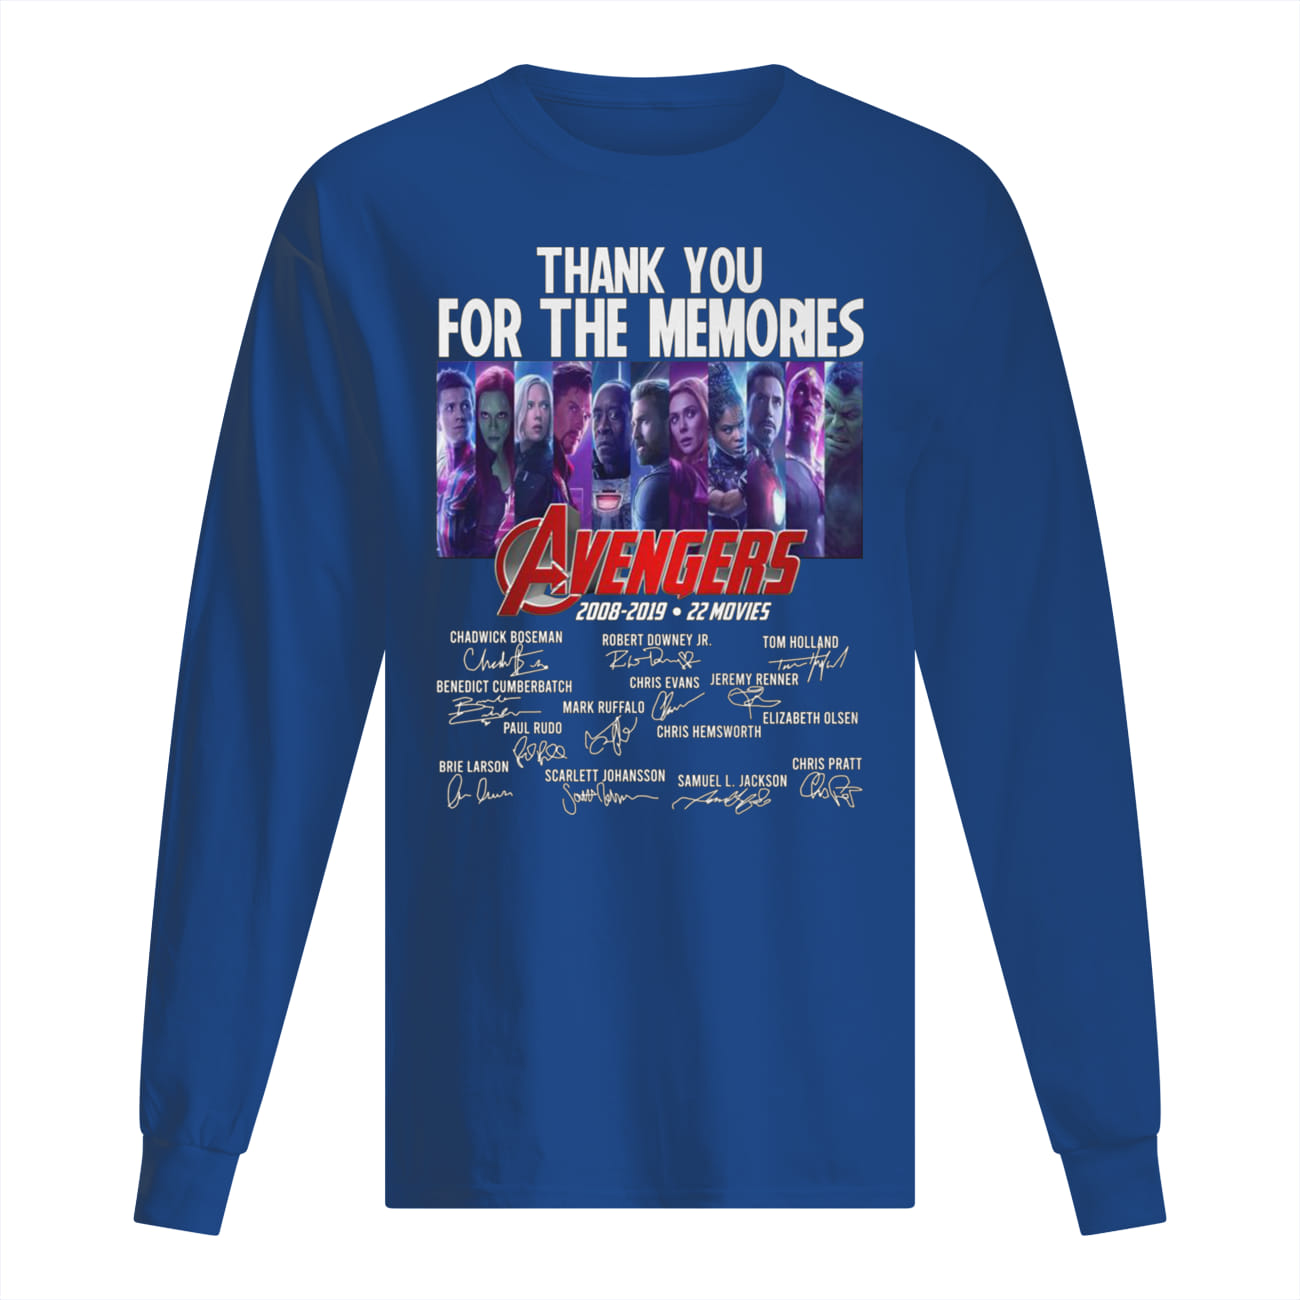 Thank you for the memories avengers 2008-2019 22 movies signature longsleeve